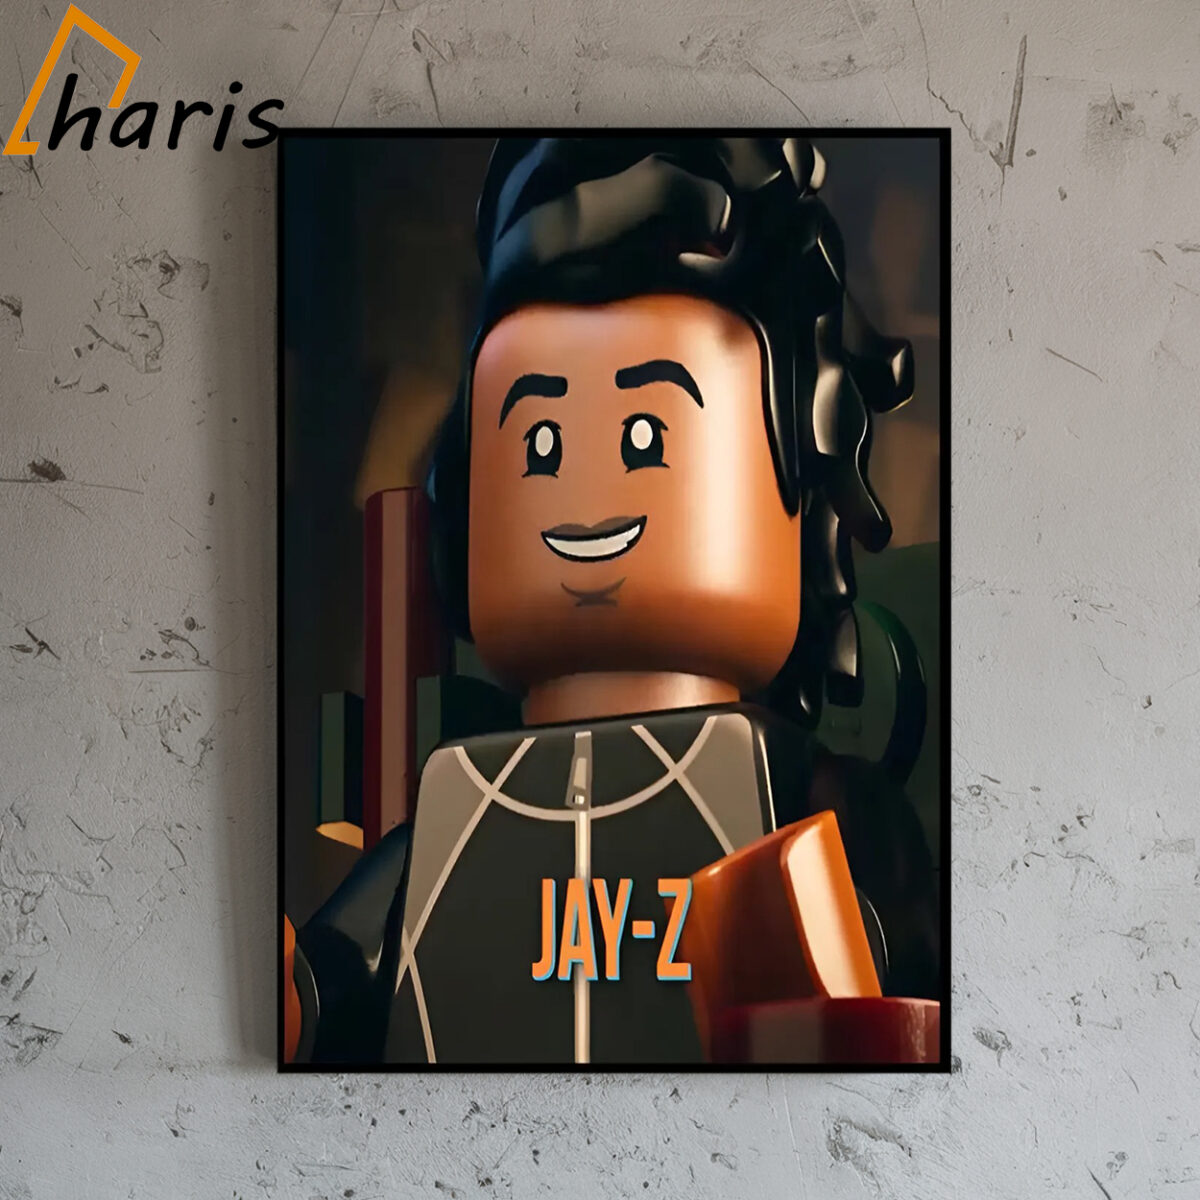 First Look At LEGO Version Of Jay Z Poster